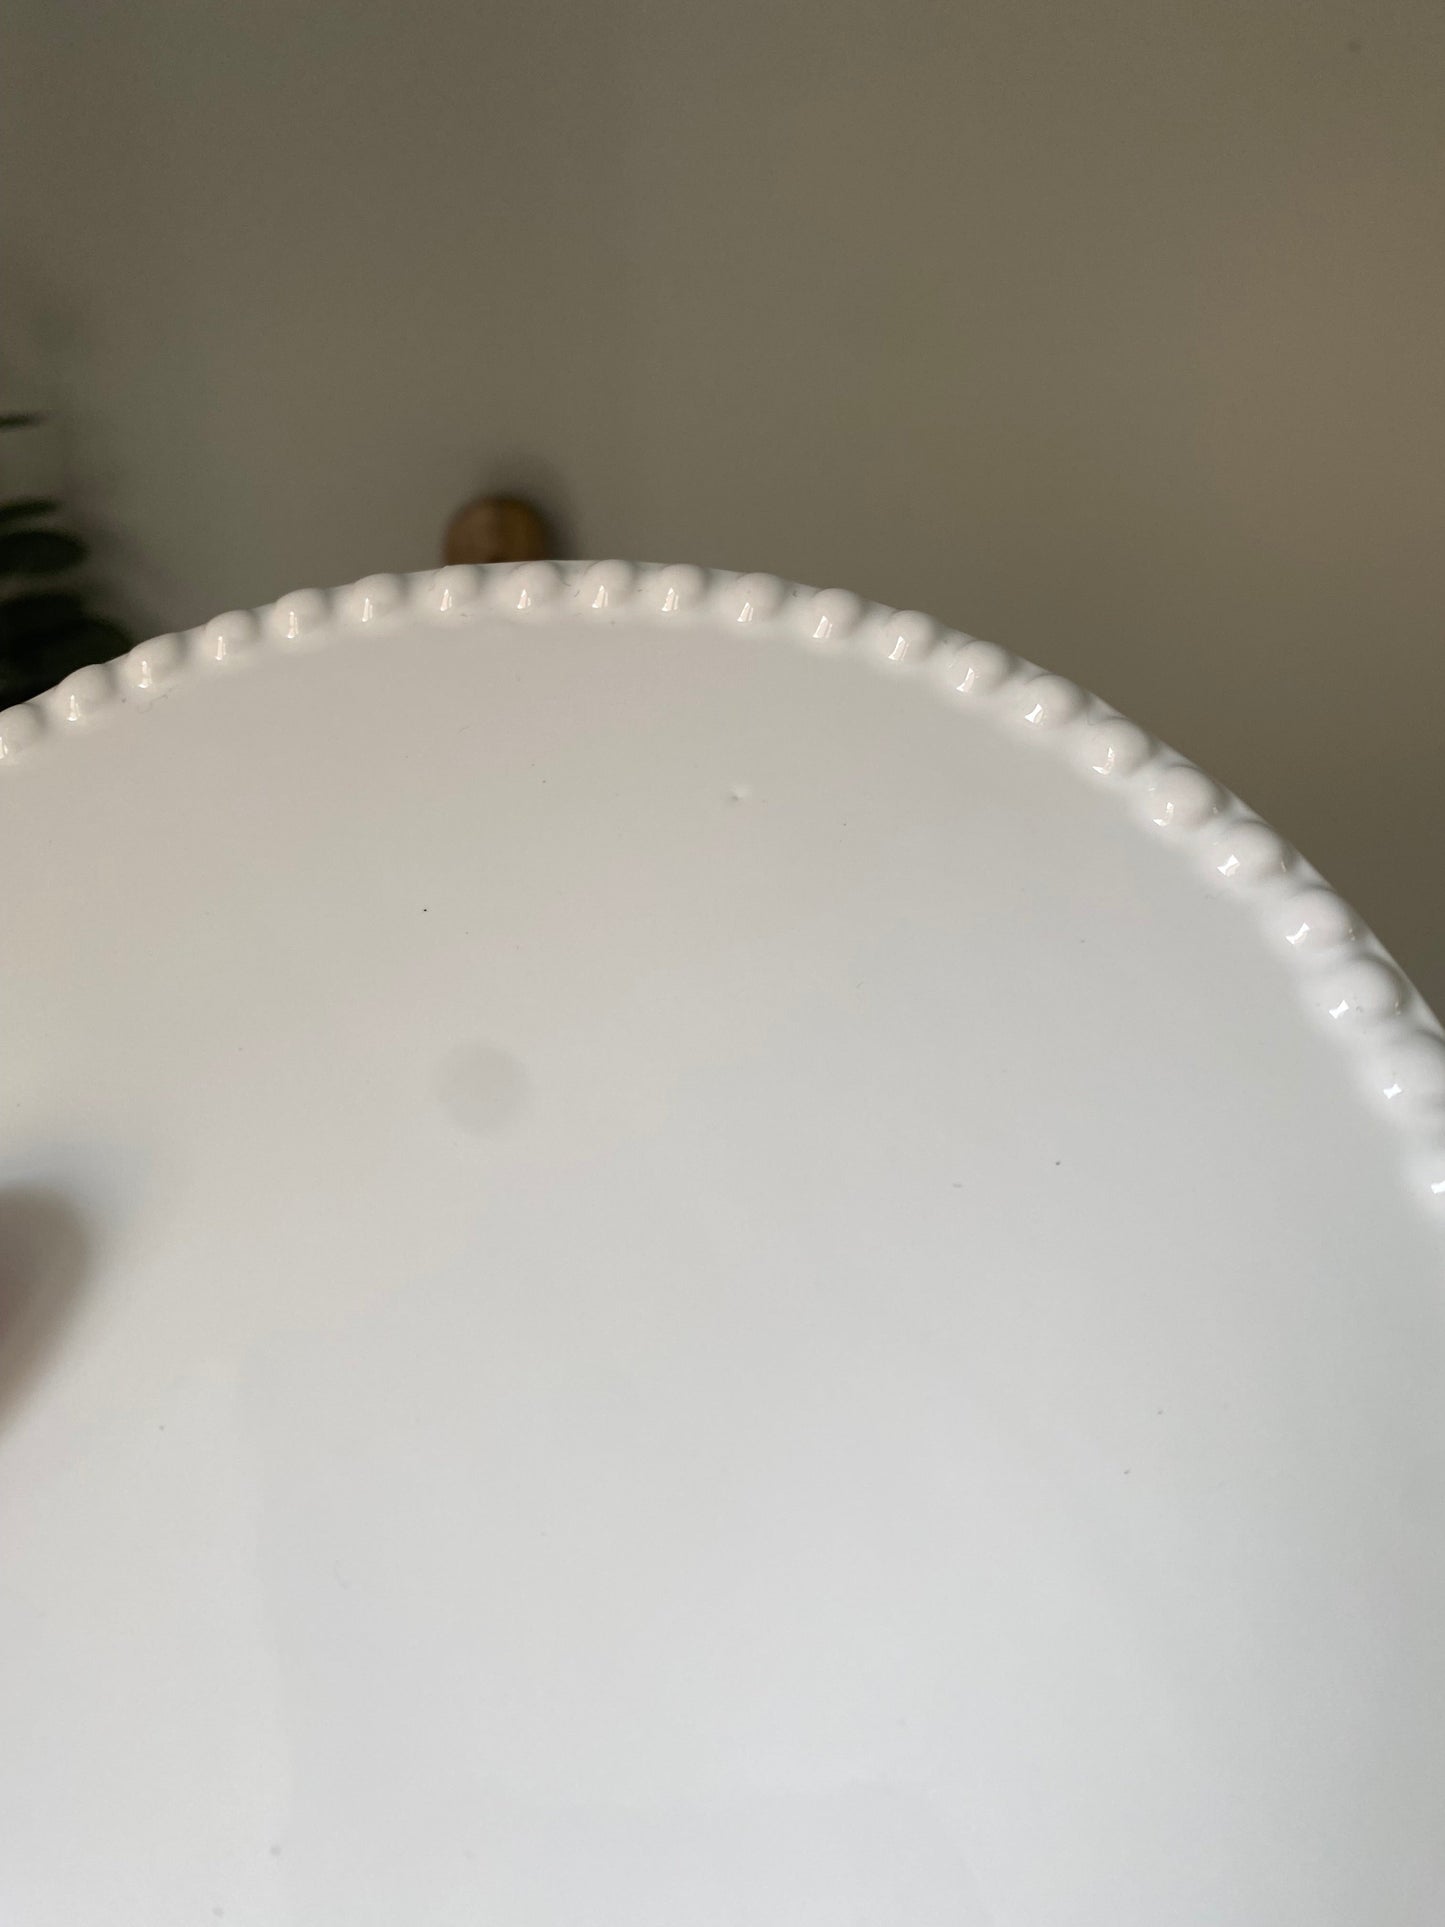 Elegant 6 Inch Cakestand / Display Plate - imperfect